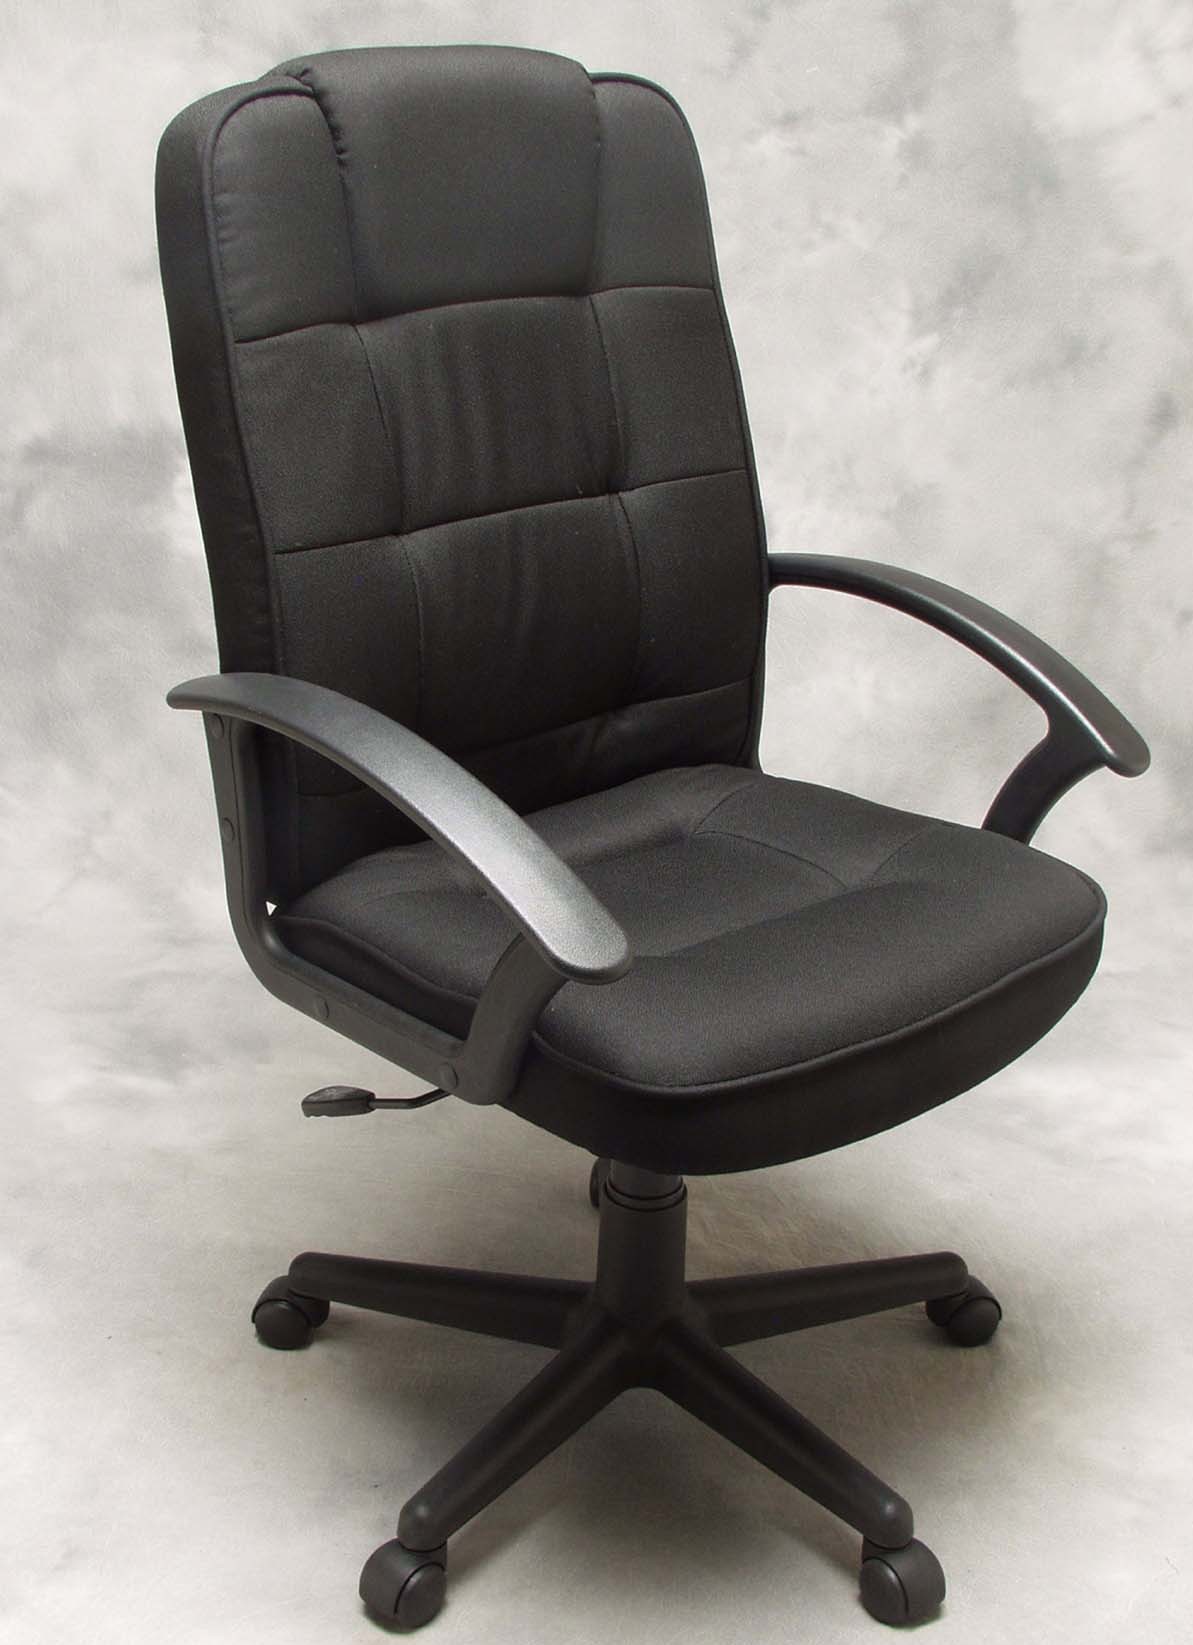 Cpsc Gruga U S A Announce Recall To Repair Office Chairs Sold At Staples Stores Cpsc Gov